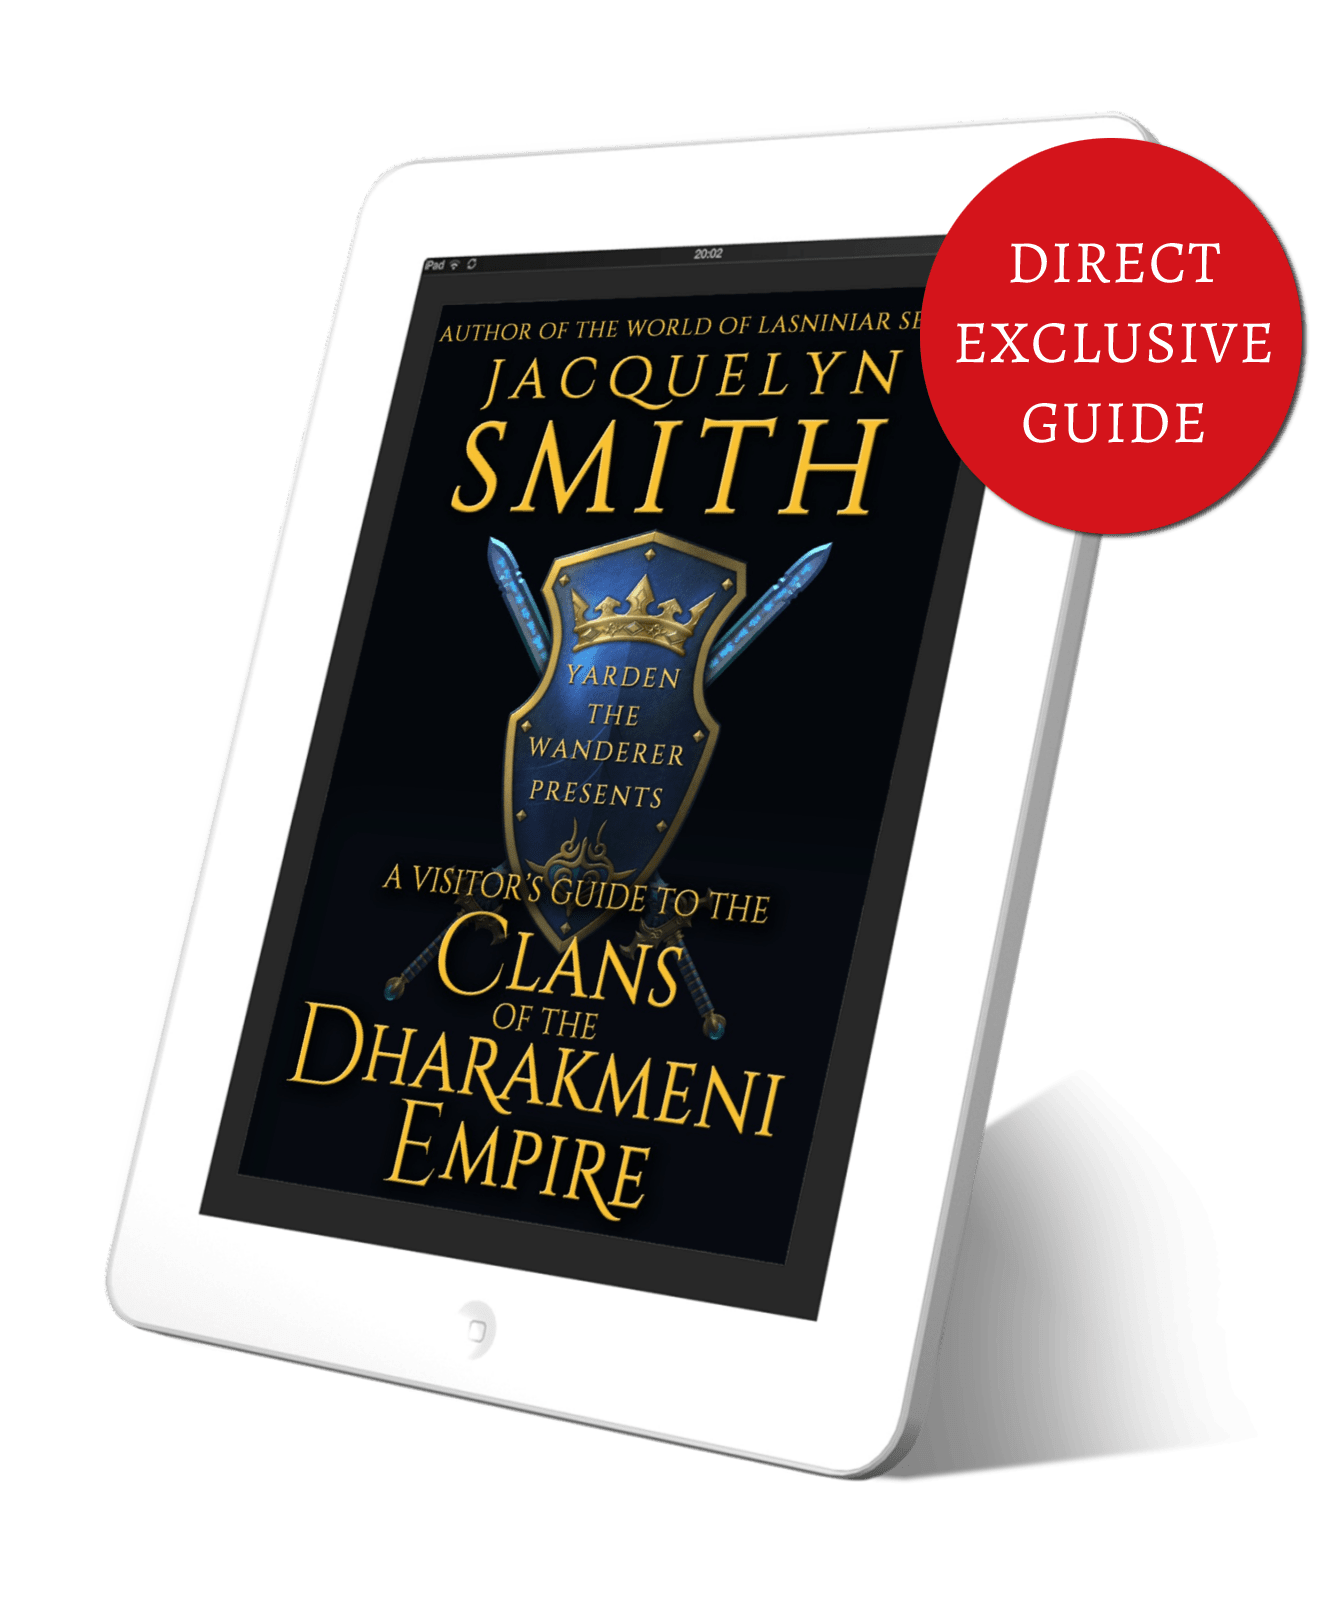 A Visitor's Guide to the Clans of the Dharakmeni Empire (Direct Exclusive) - Jacquelyn Smith Books